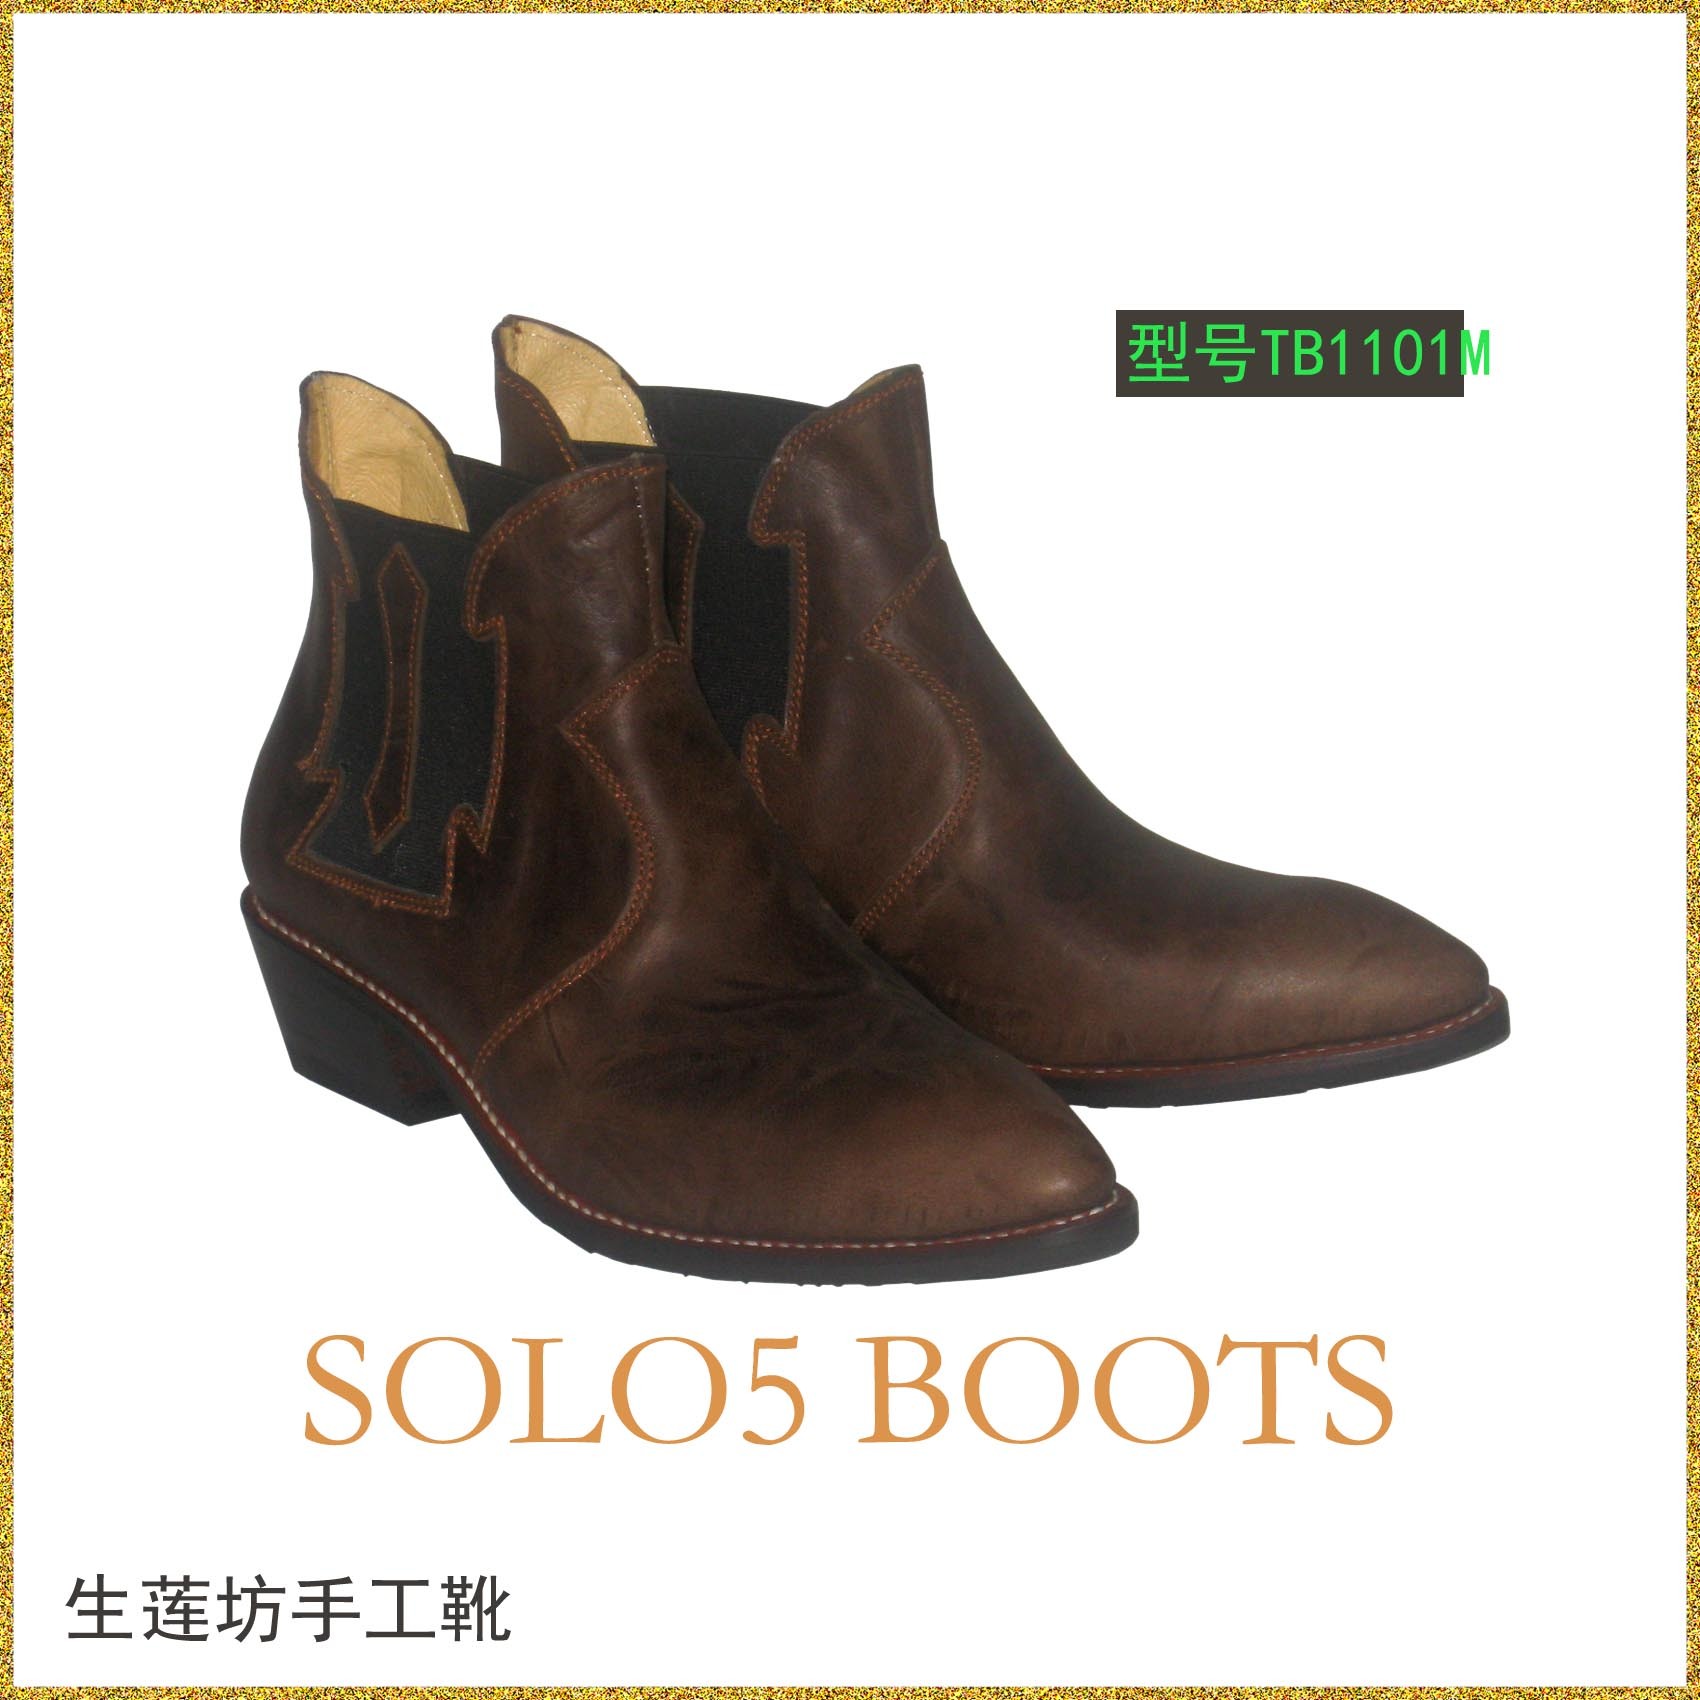 ... bootsriding boots TB1101M being born lotus lane leather shoes by hand